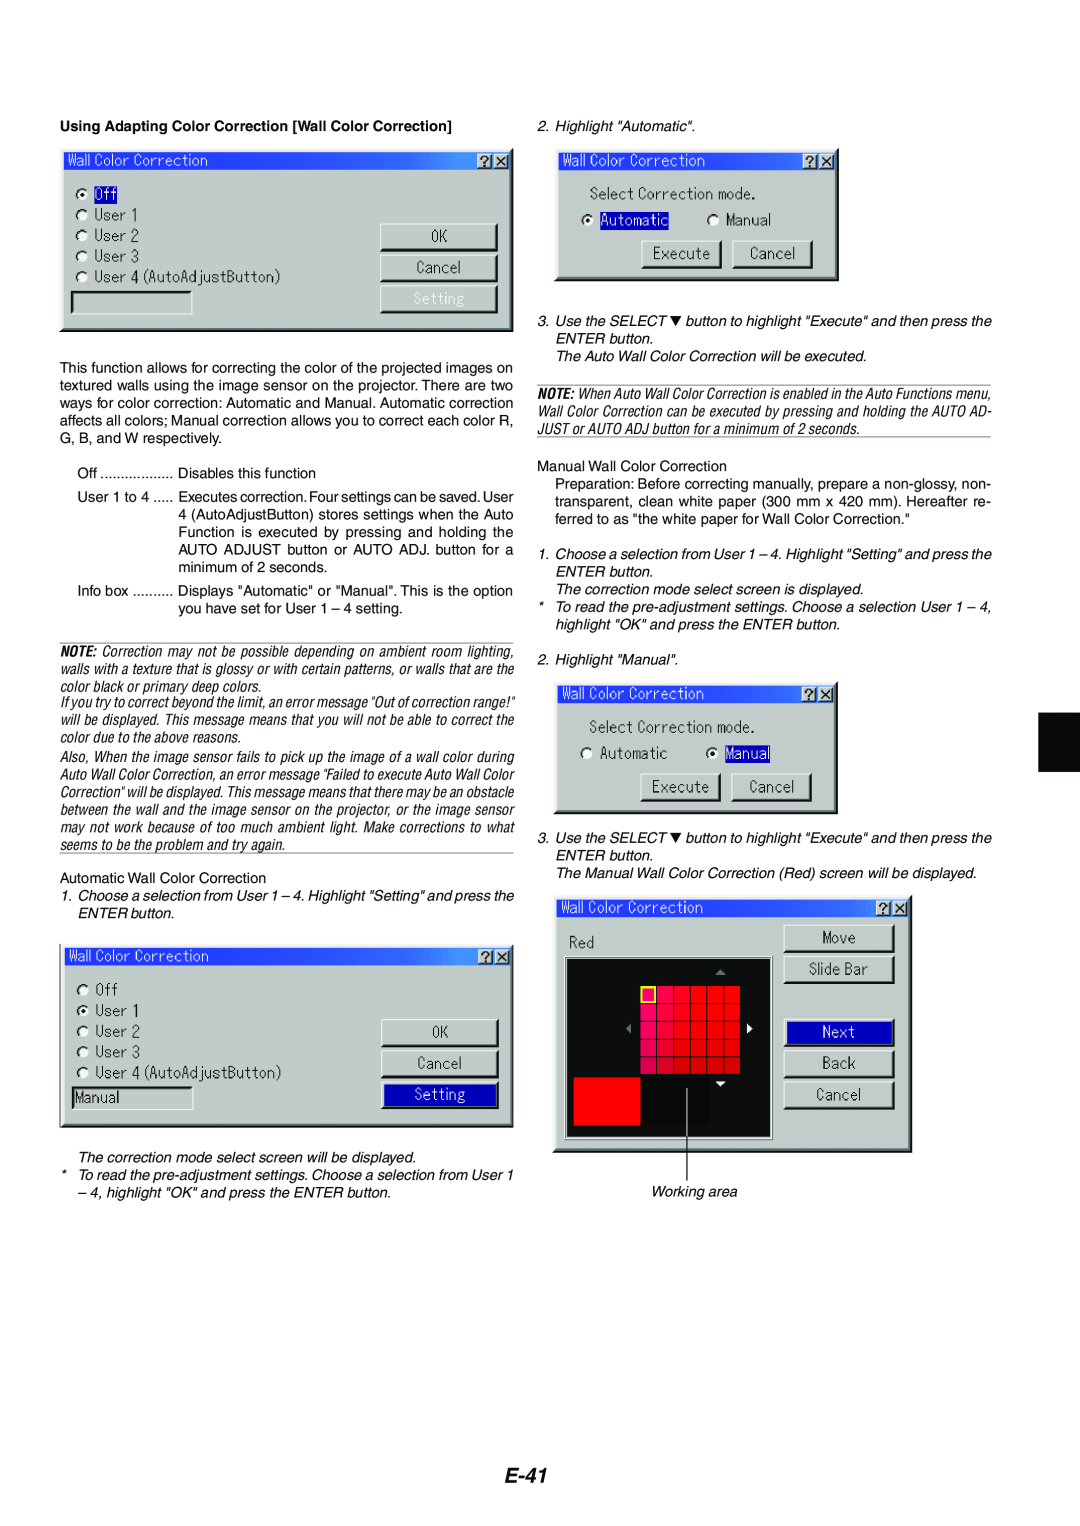 NEC MT1065/MT1060 user manual E-41, Using Adapting Color Correction Wall Color Correction 